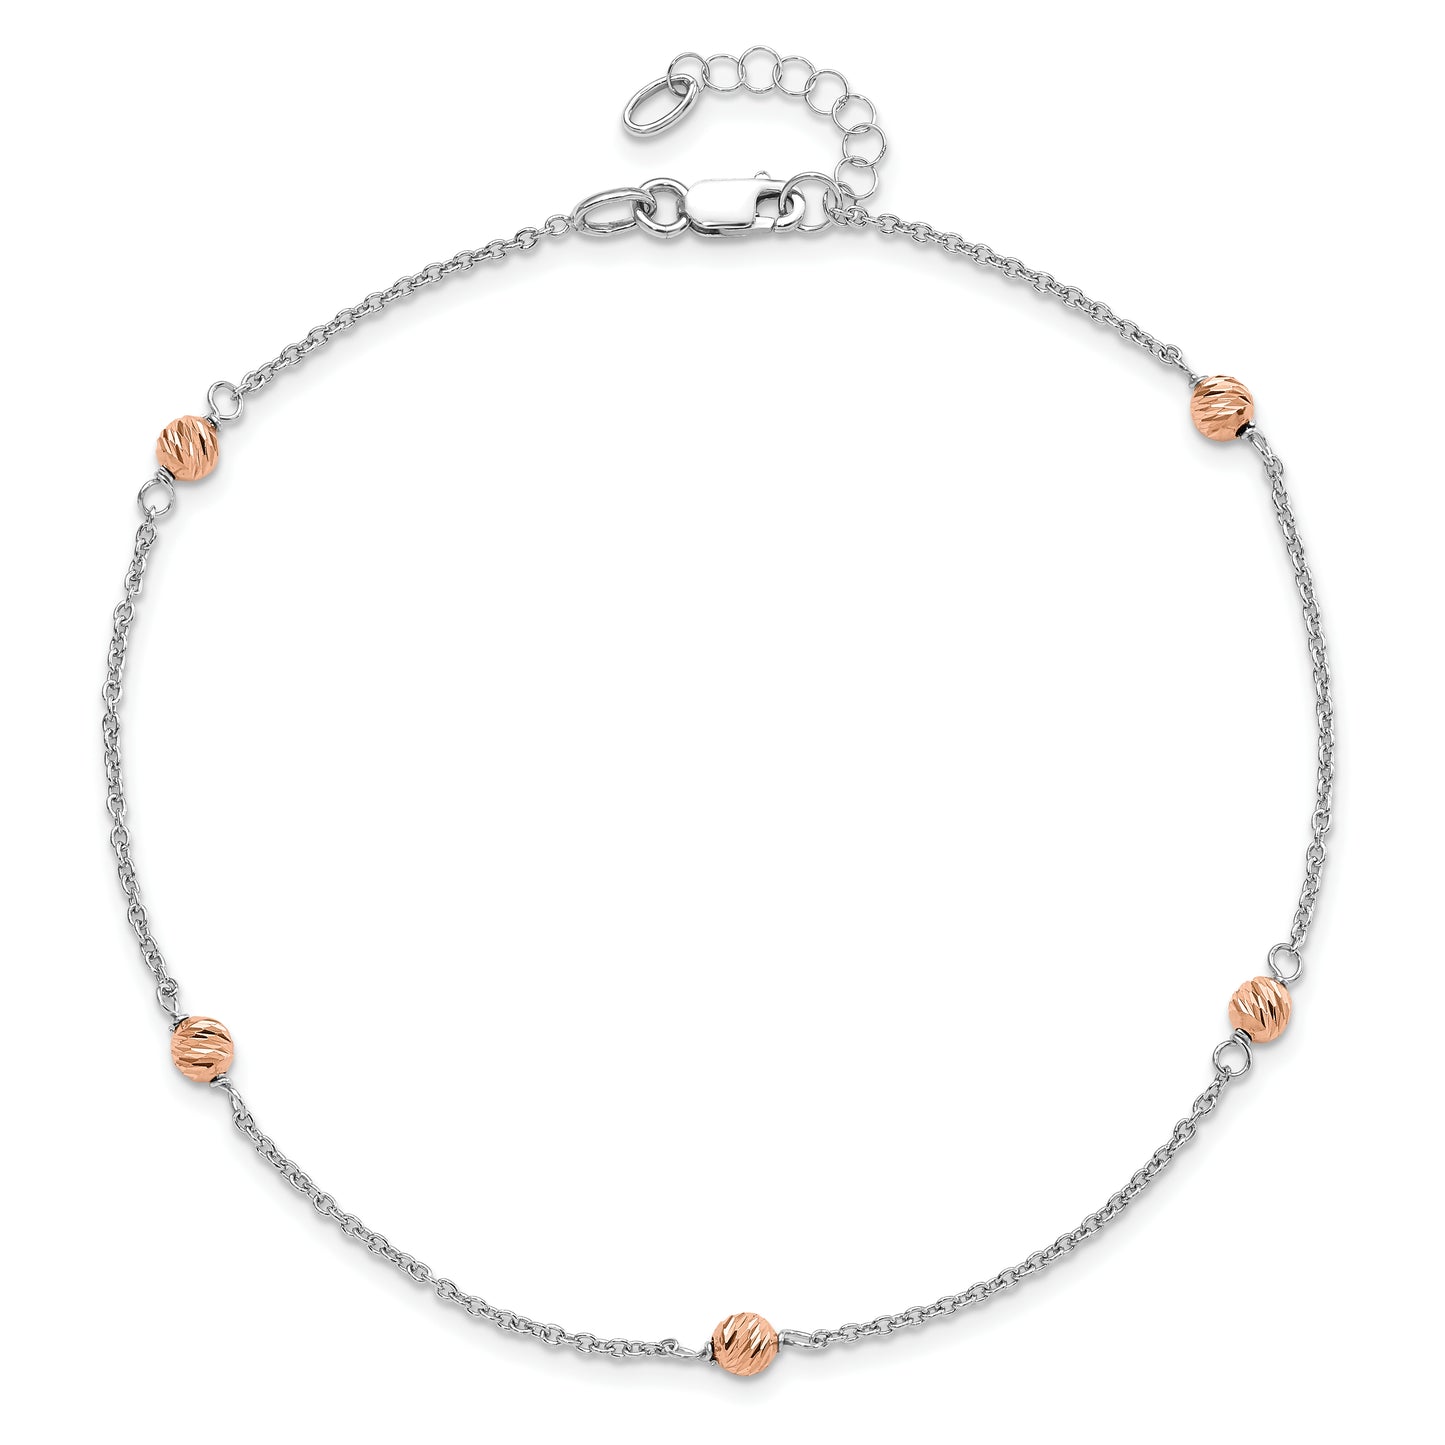 Leslie's 14K White and Rose Gold Polished D/C Beaded with 1in ext. Anklet